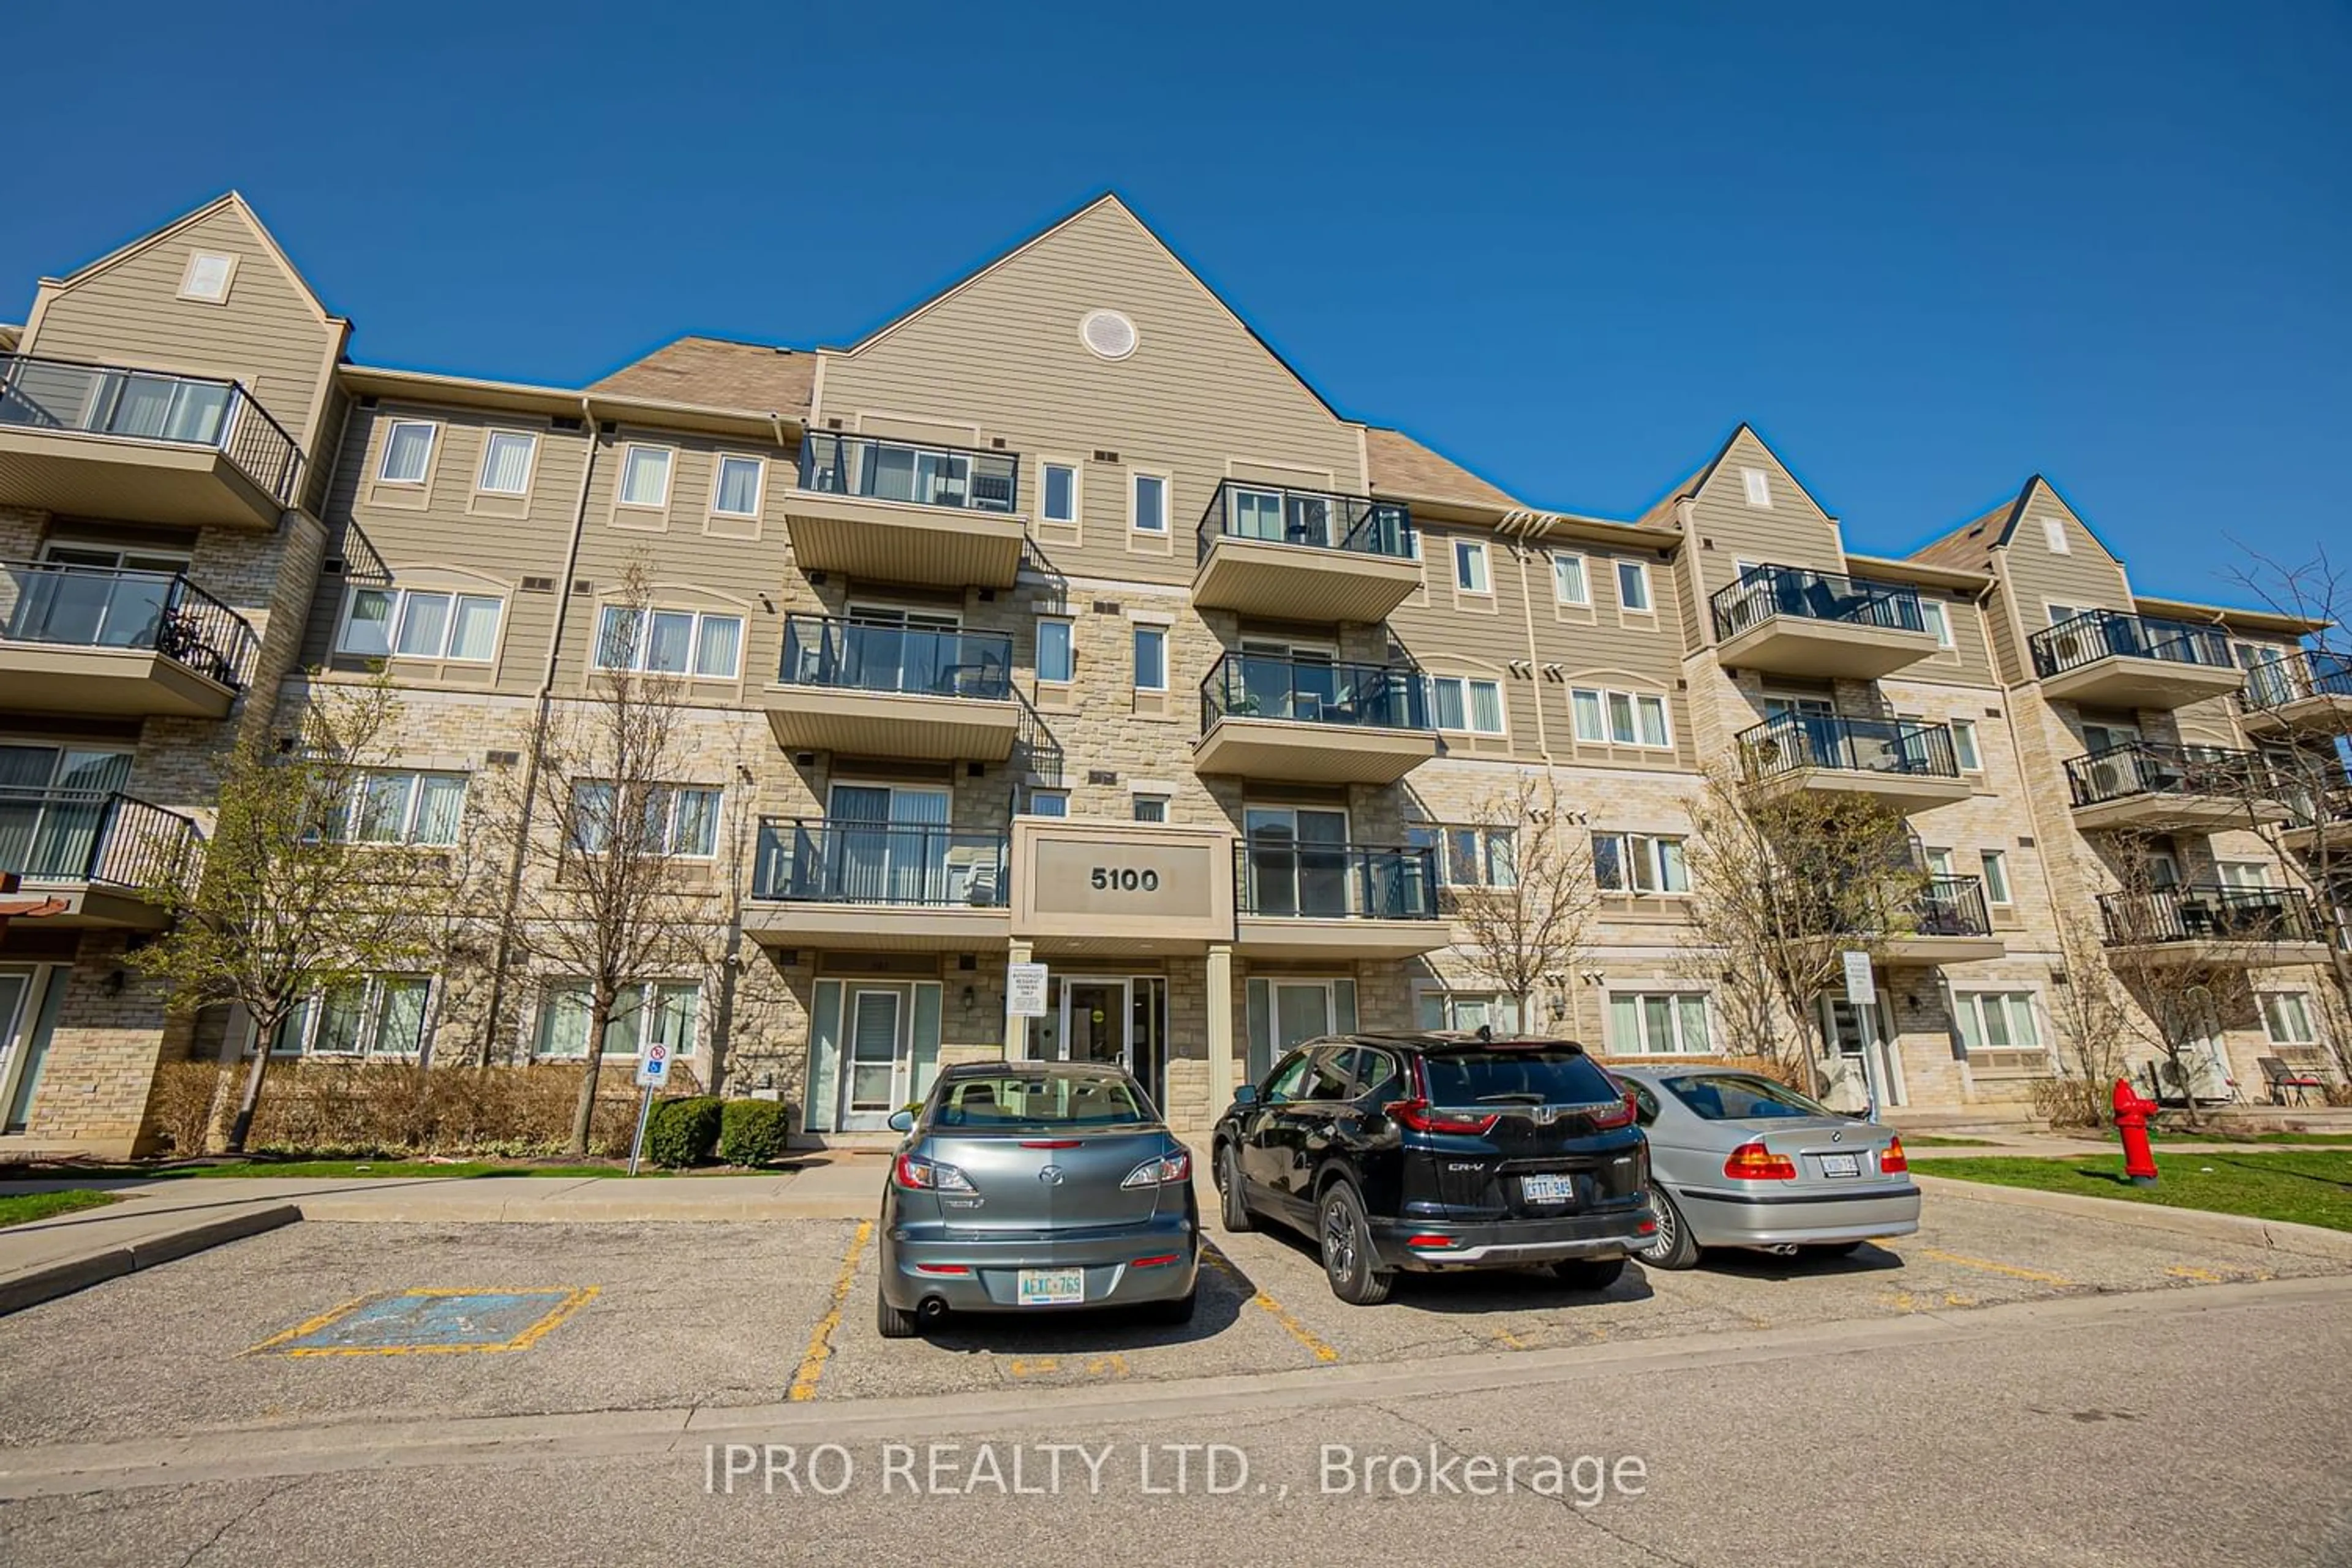 A pic from exterior of the house or condo for 5100 Winston Churchill Blvd #107, Mississauga Ontario L5M 0N9